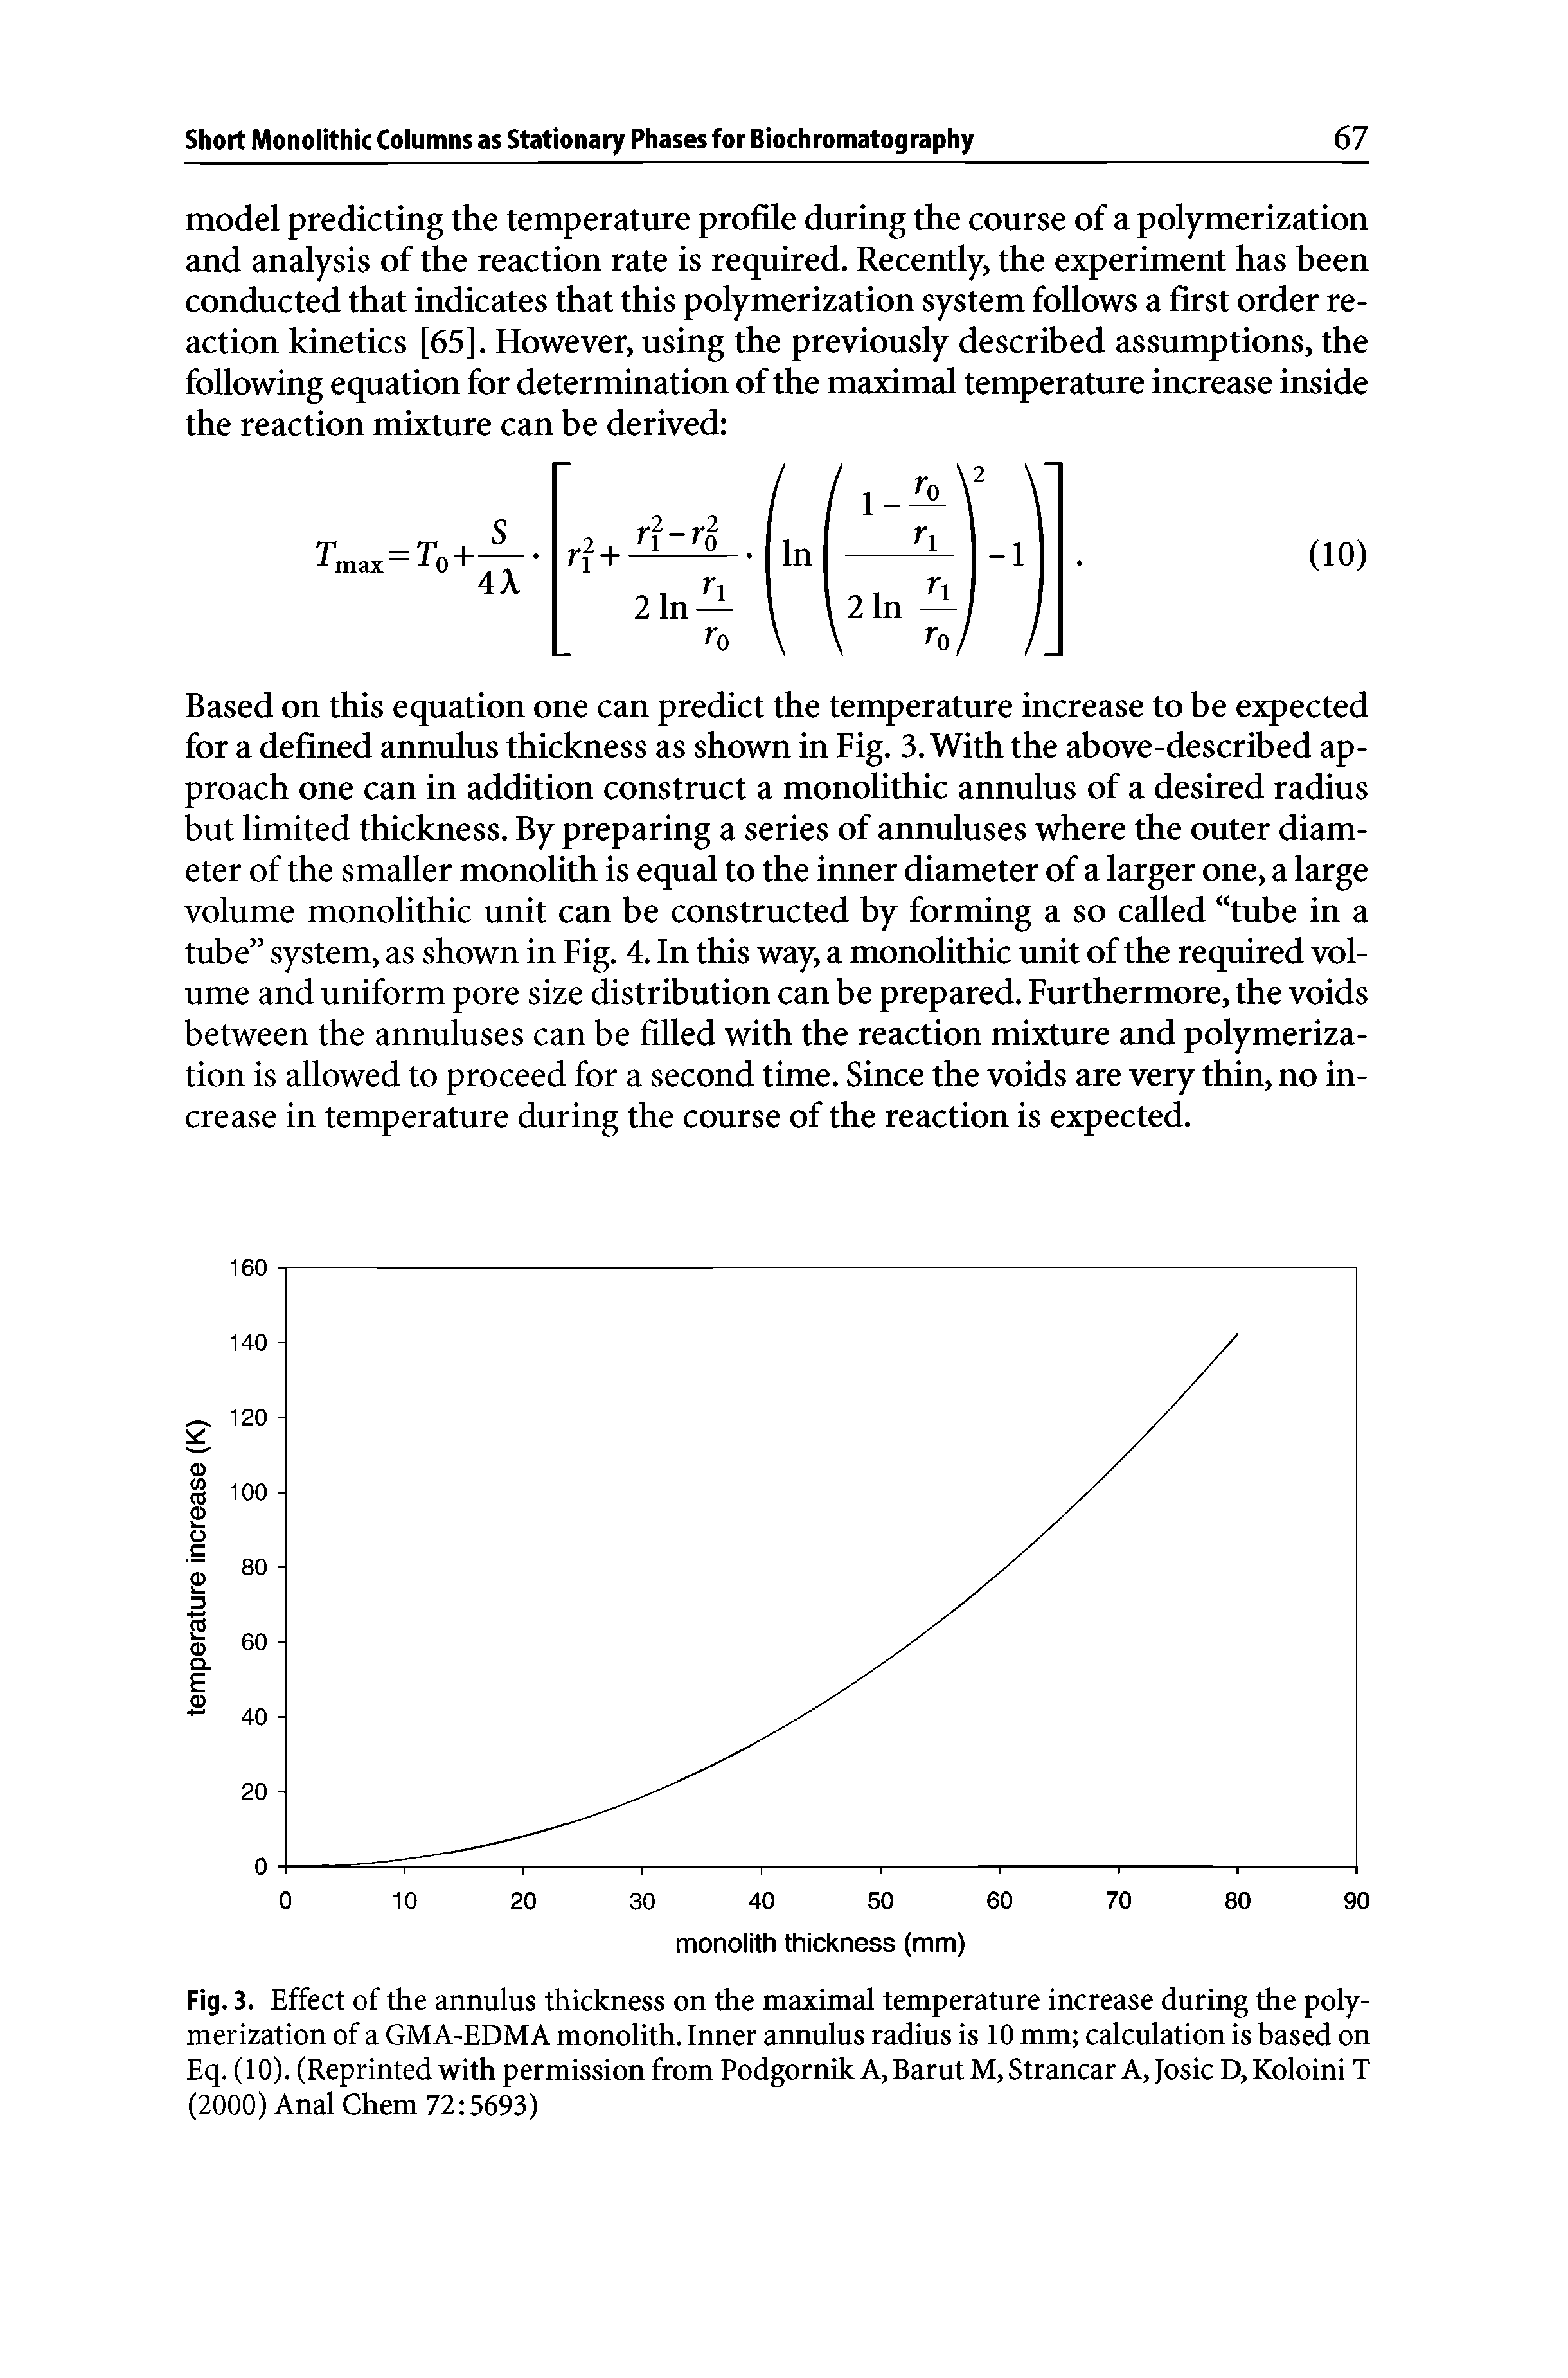 Fig. 3. Effect of the annulus thickness on the maximal temperature increase during the polymerization of a GMA-EDMA monolith. Inner annulus radius is 10 mm calculation is based on Eq. (10). (Reprinted with permission from Podgornik A, Barut M, Strancar A, Josic D,Koloini T (2000) Anal Chem 72 5693)...